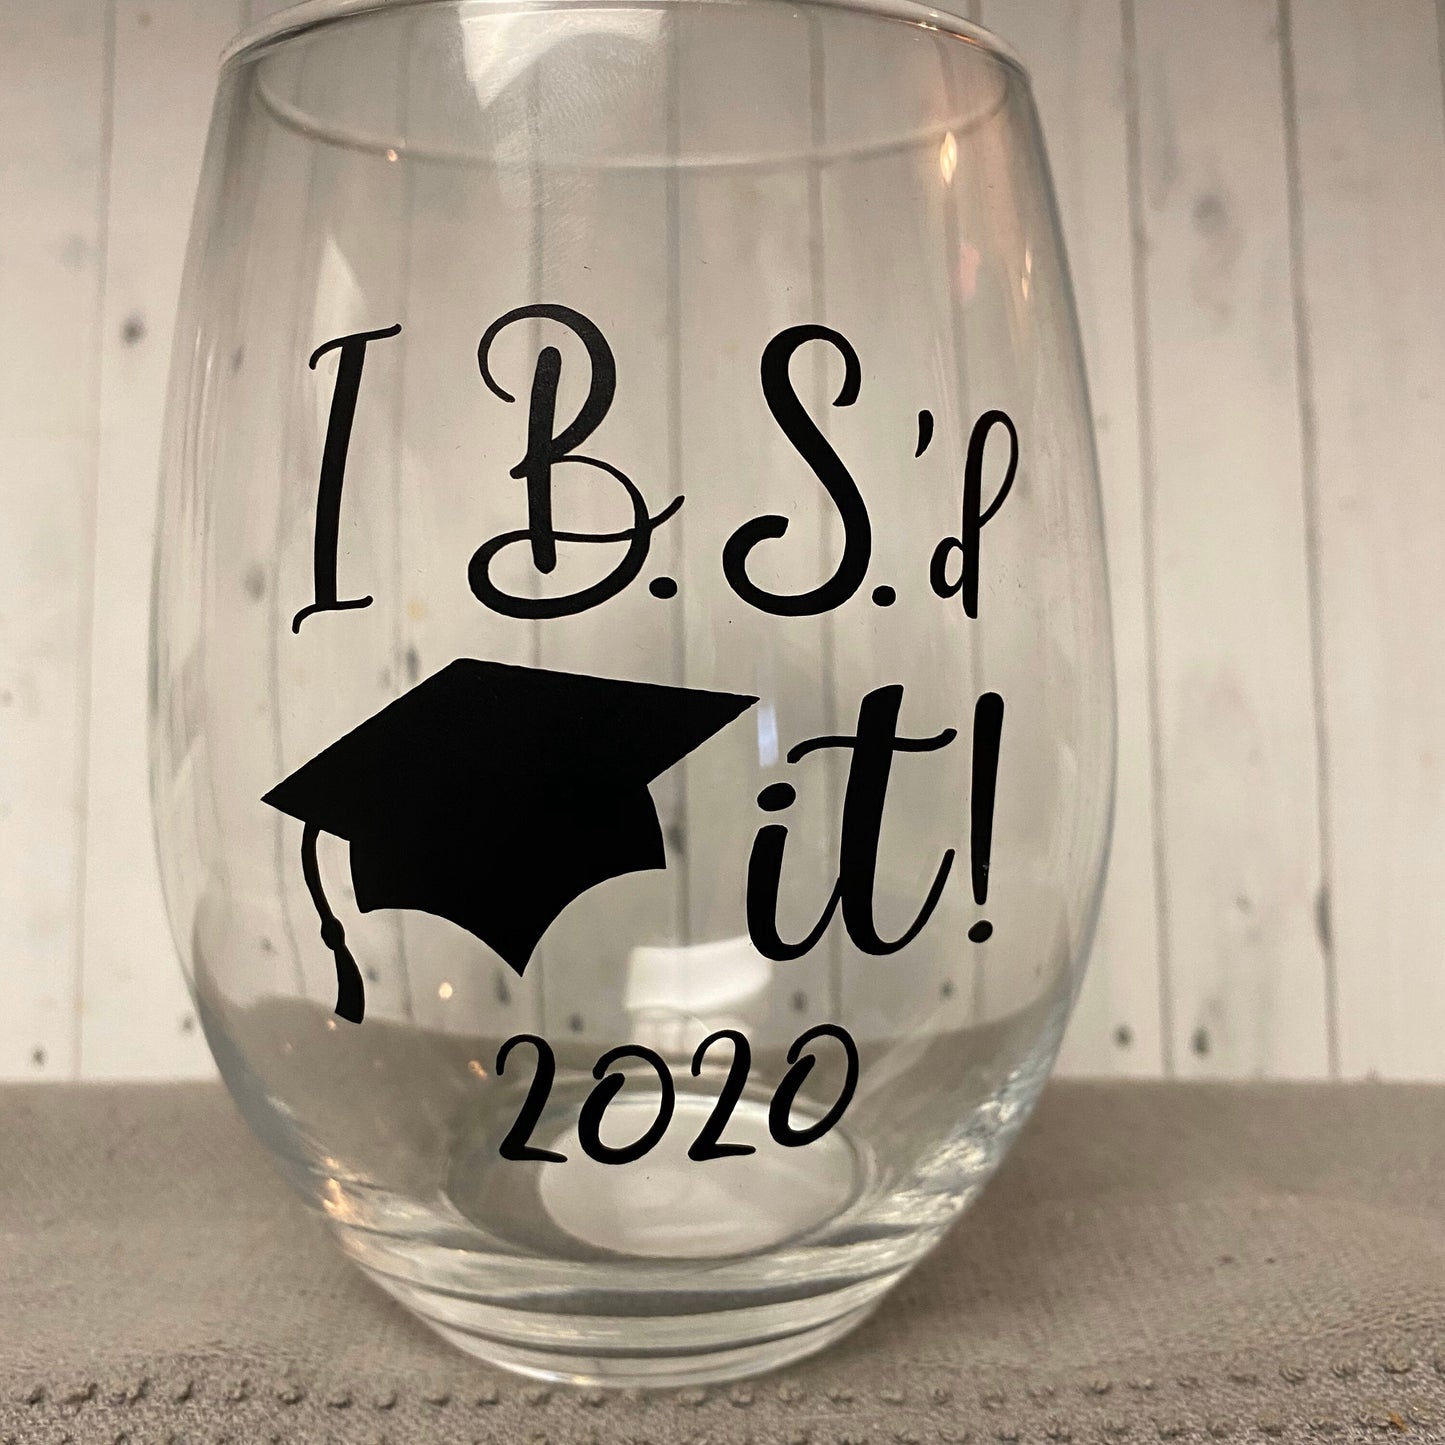 I BS’d it graduation gift, BS, college graduation gift, funny college grad gift, bachelors of science gift, class of 2021